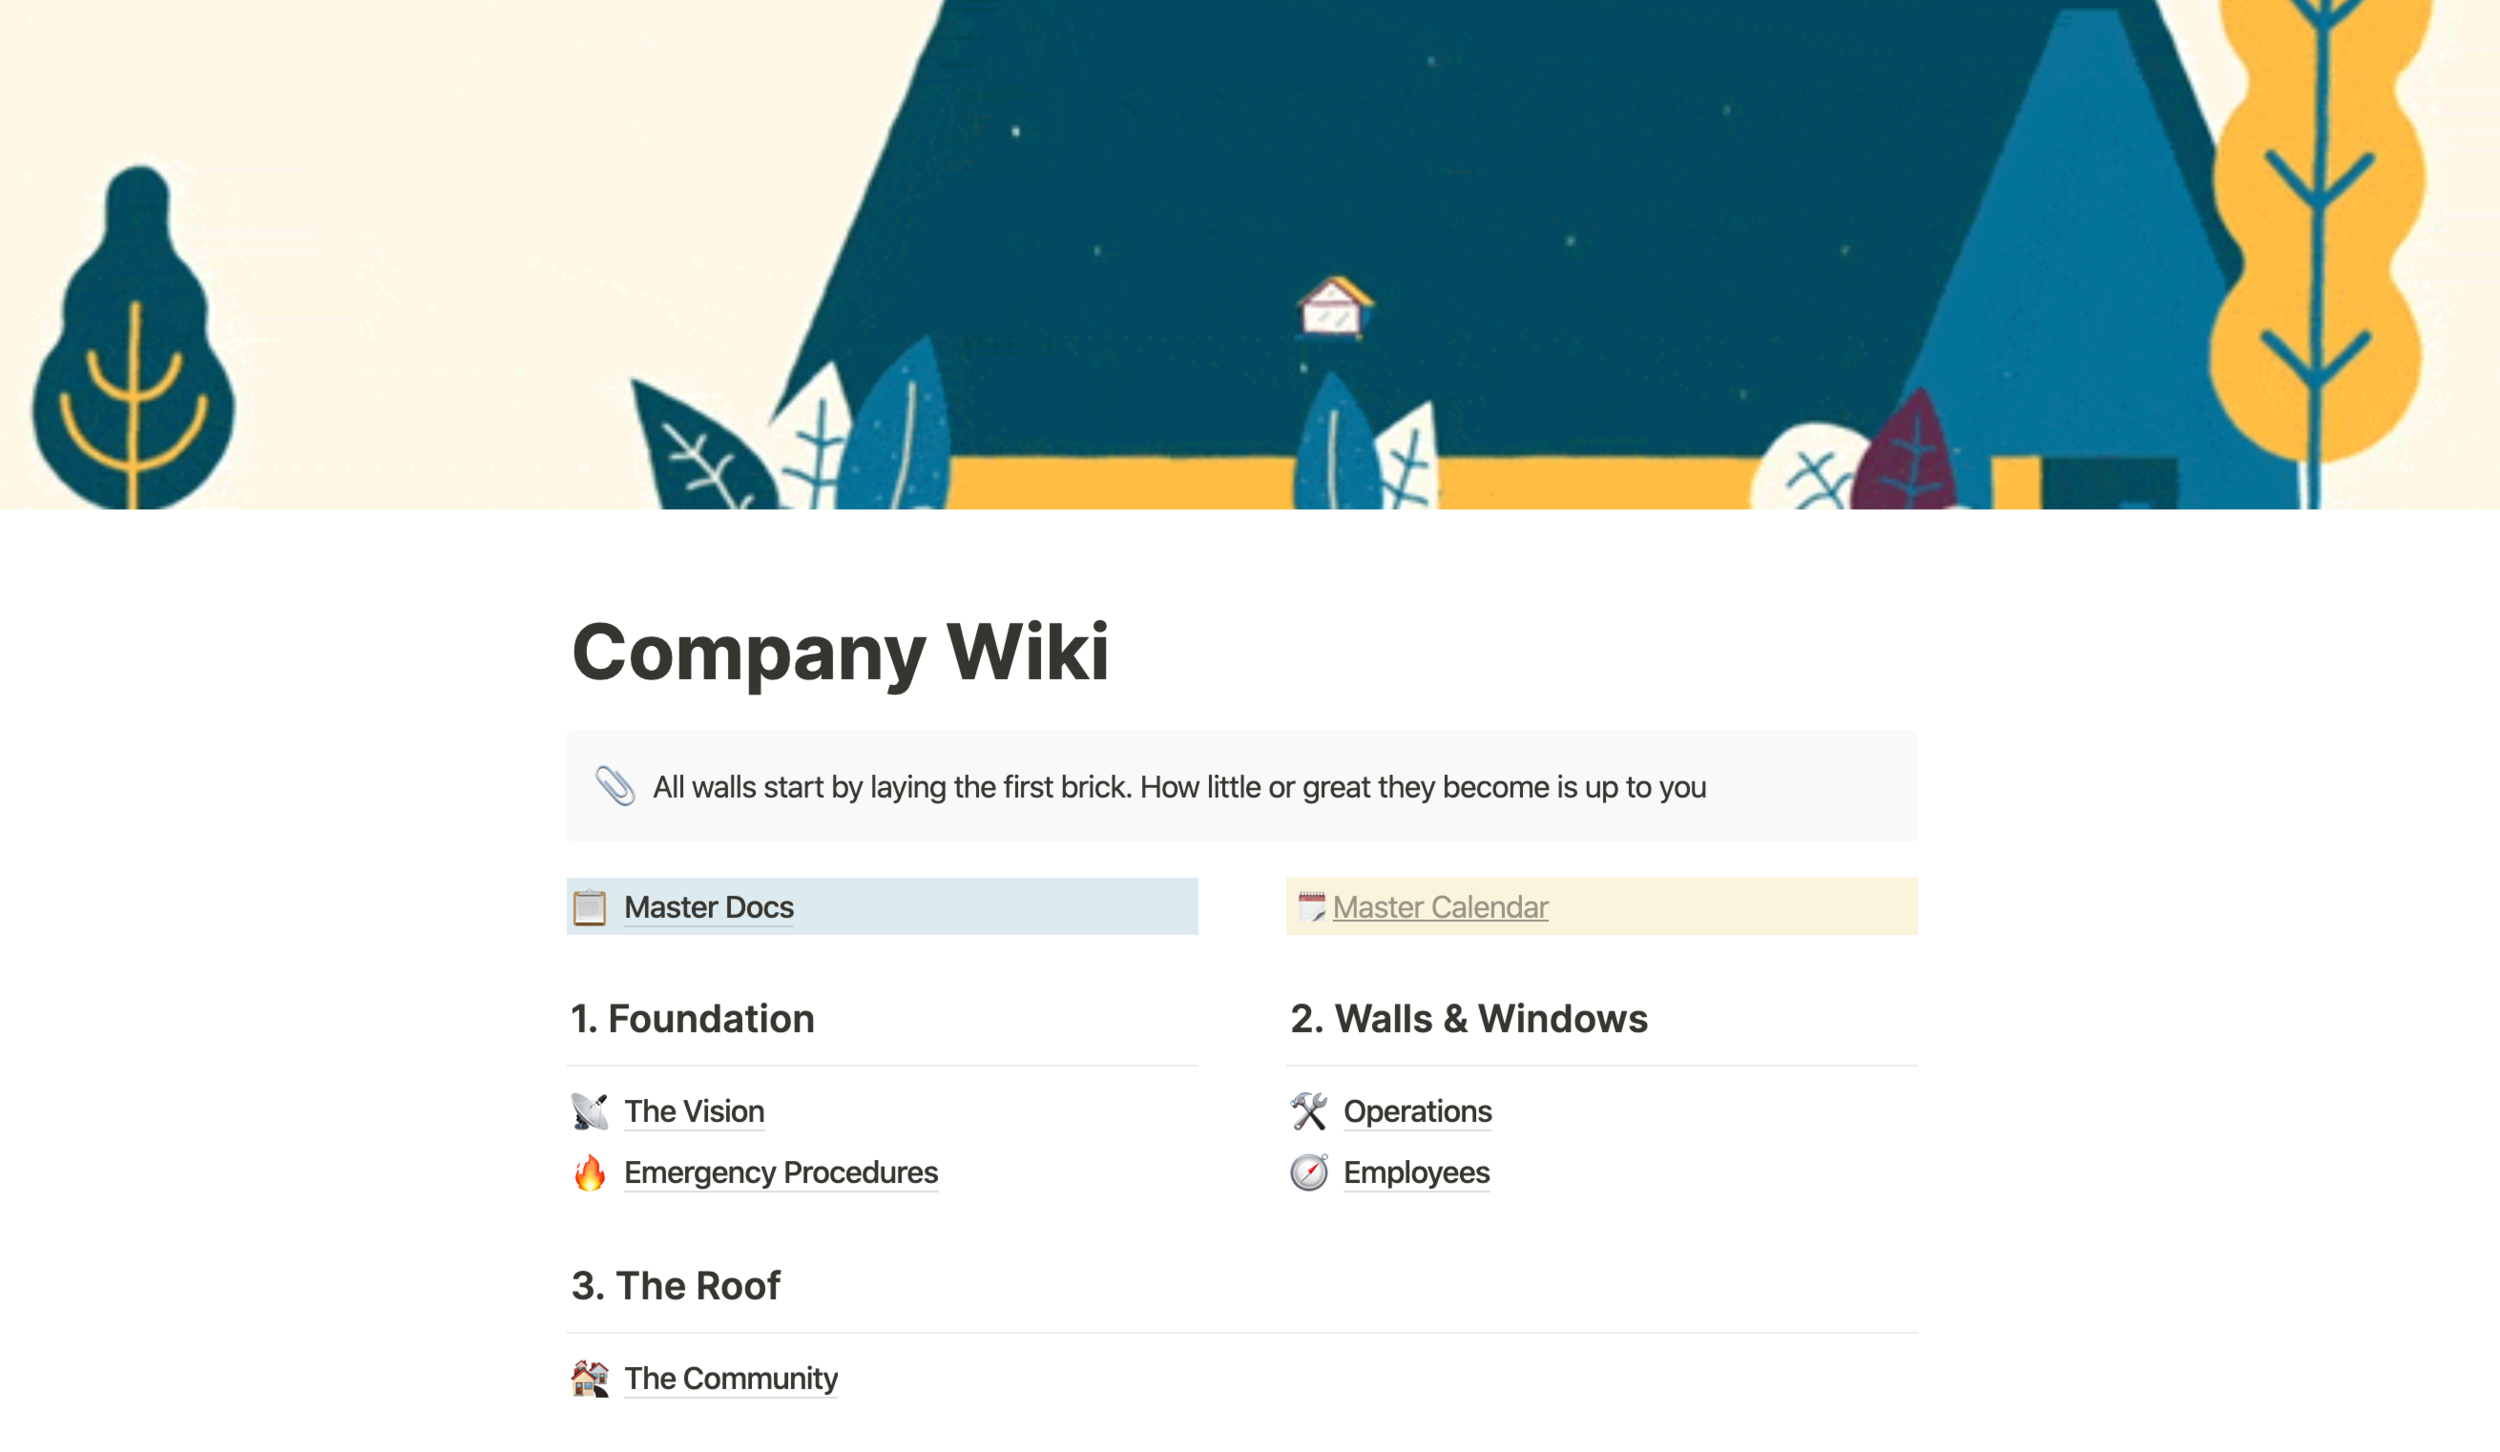 Best Wiki Templates from Notion